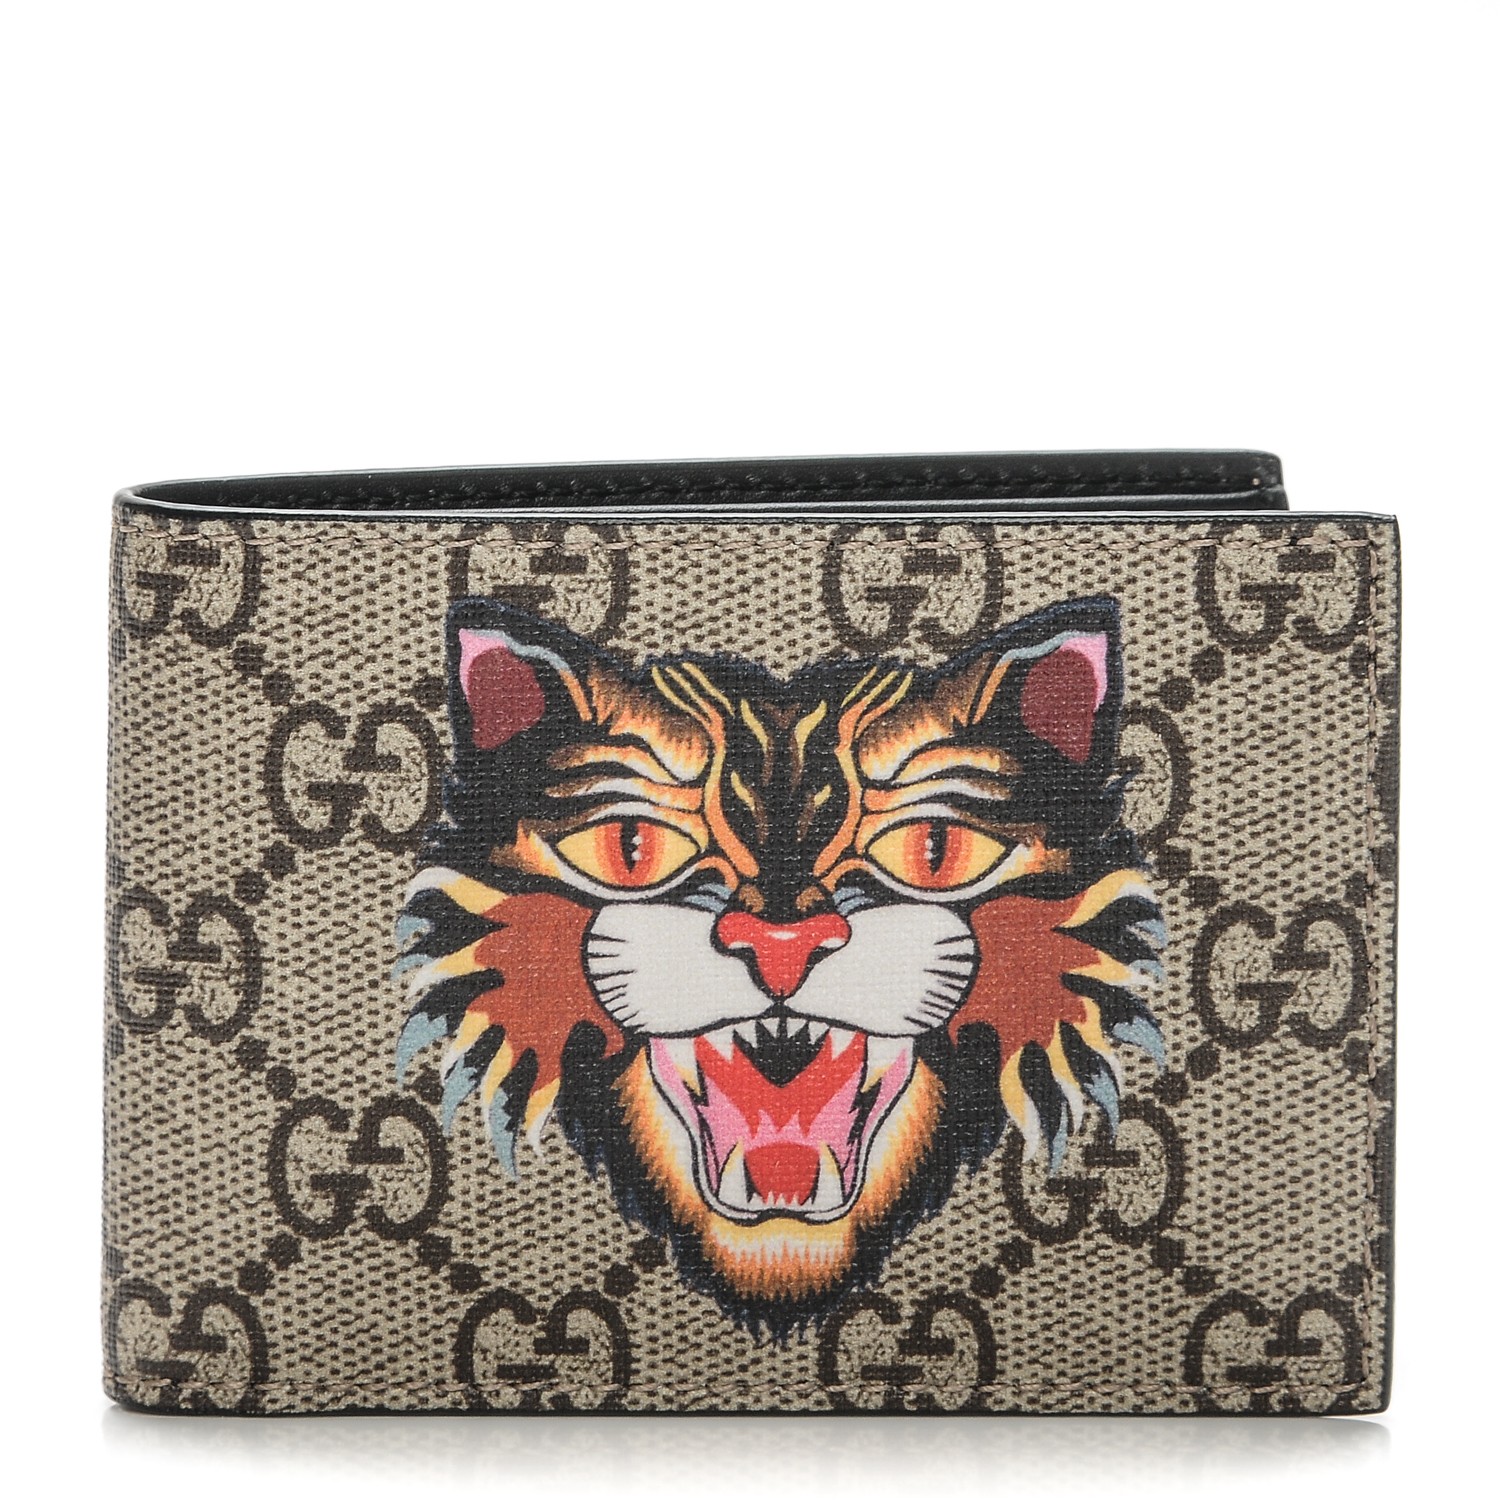 gucci wallet angry cat off 76% - www 